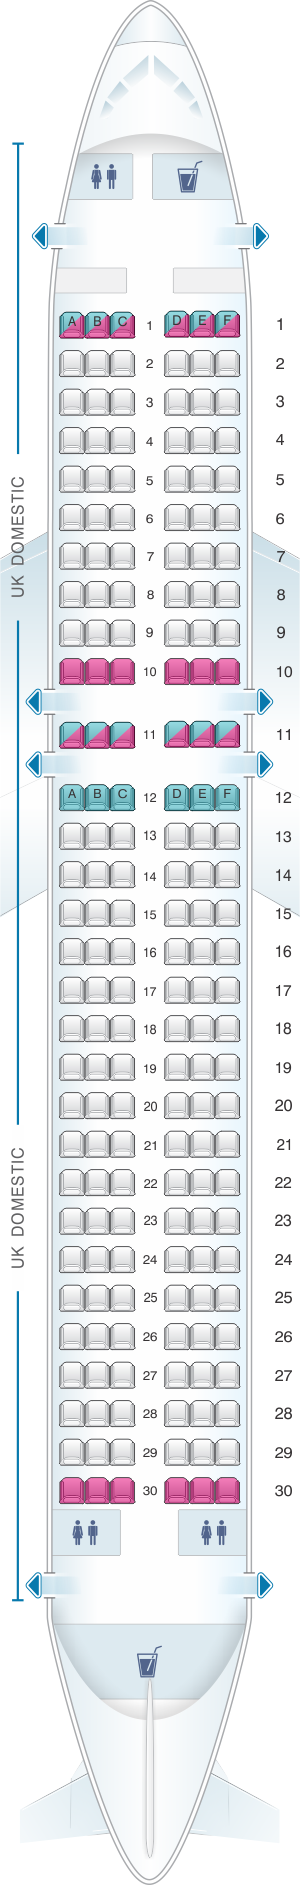 Seat map for British Airways Airbus A320 Domestic Layout